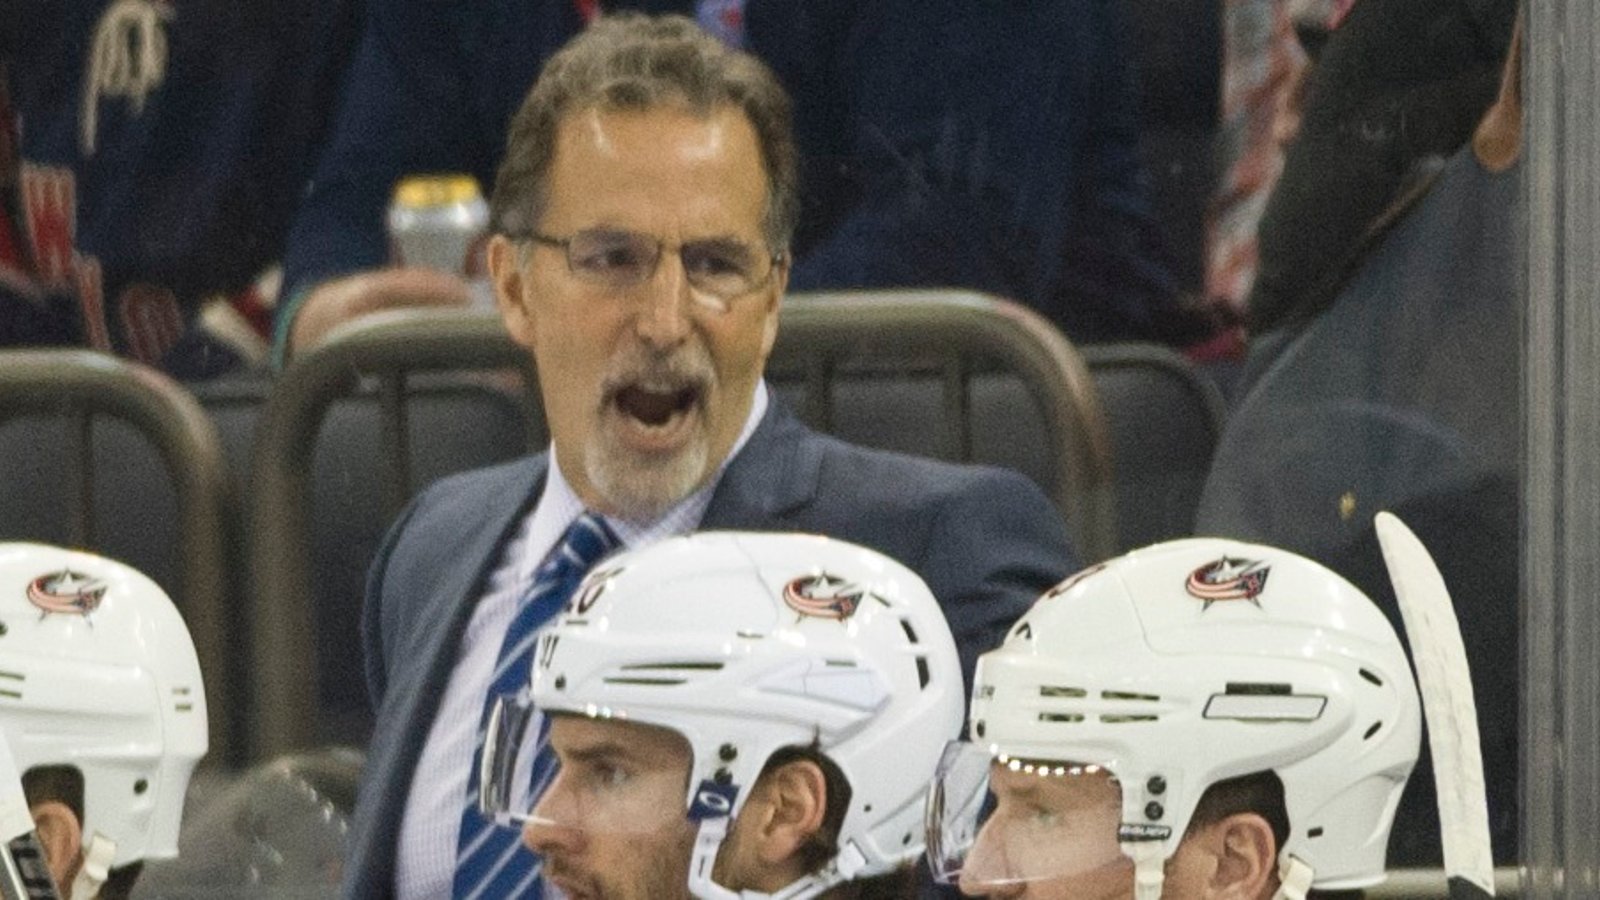 John Tortorella makes one of his players a healthy scratch &amp; calls him out publicly!